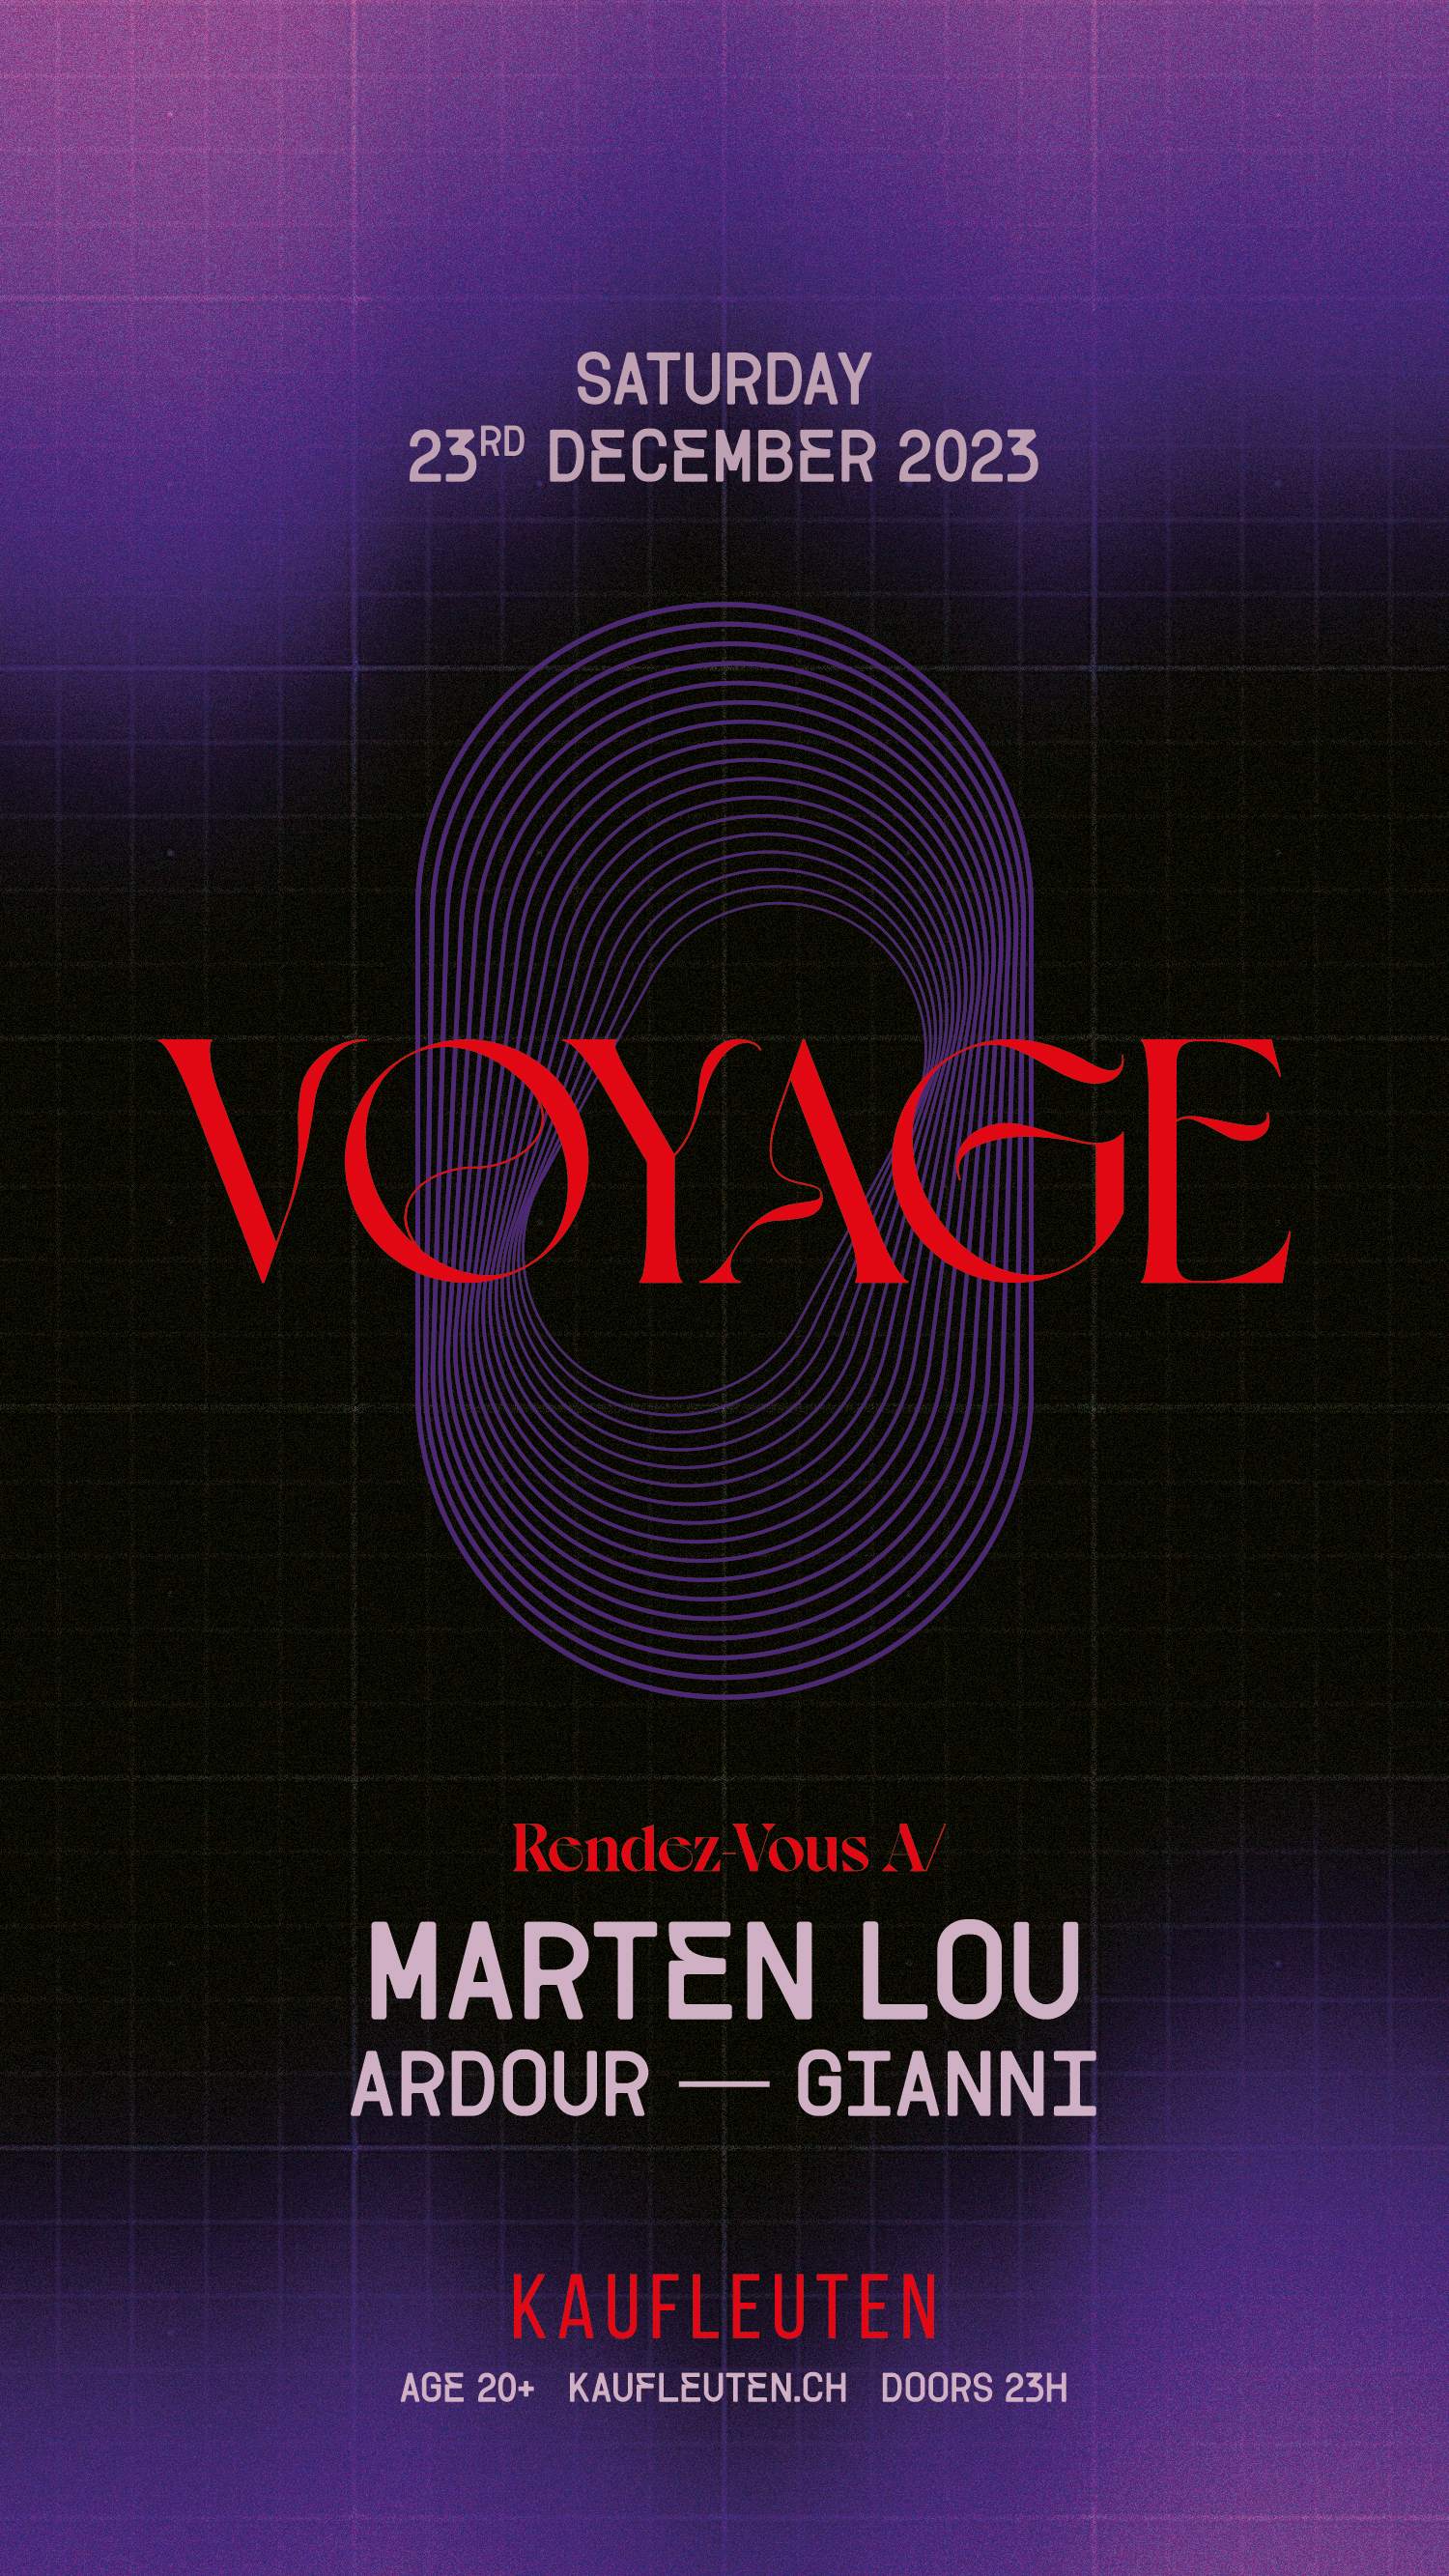 Voyage with Marten Lou - フライヤー表